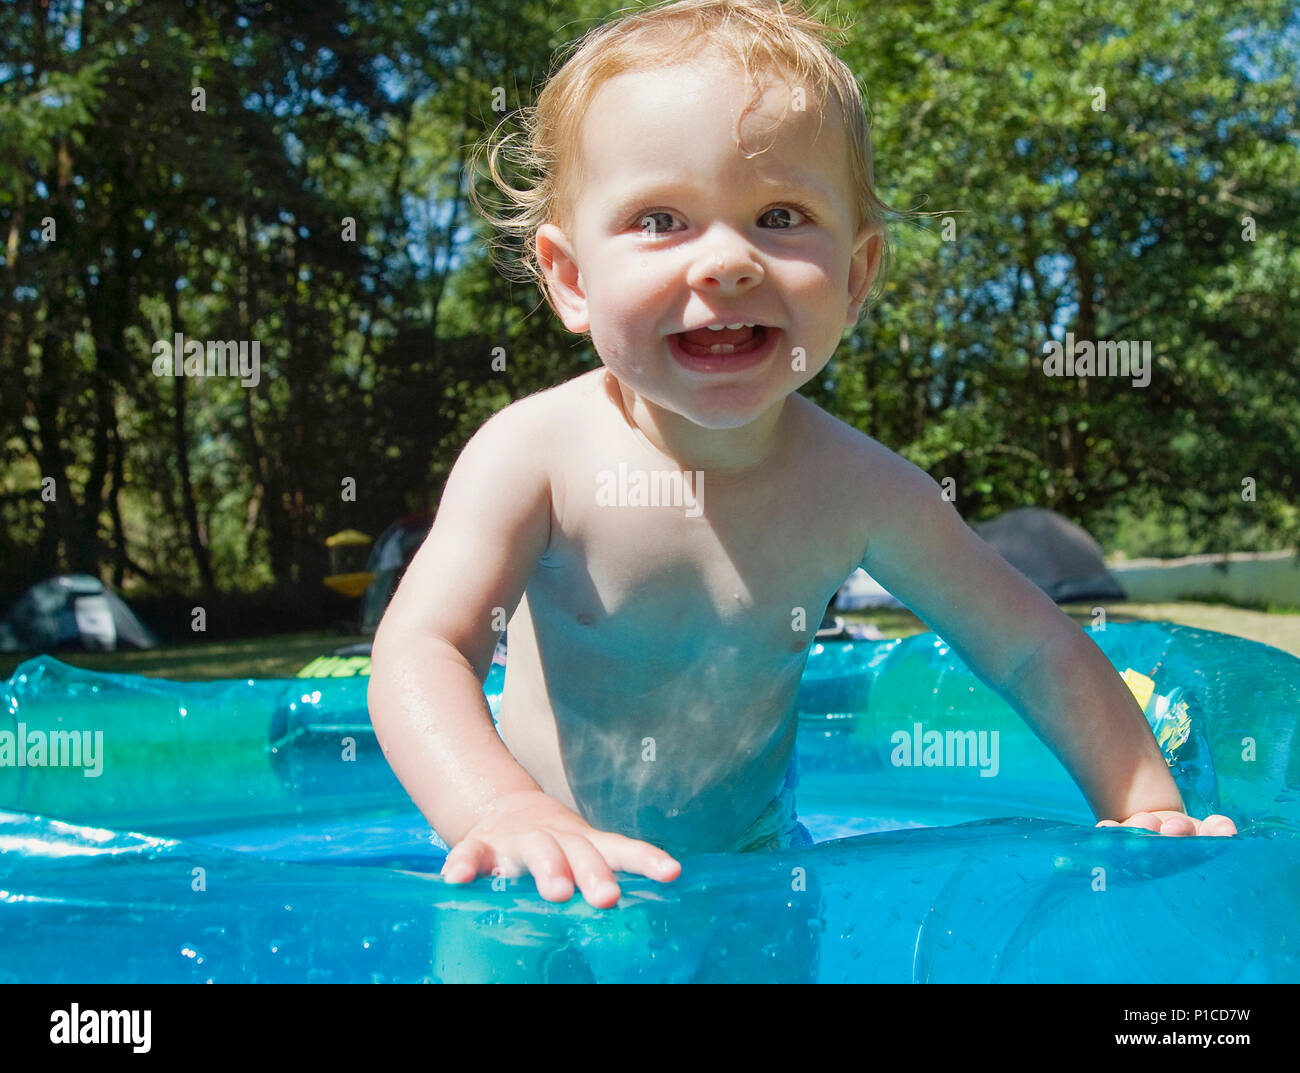 An 11 month old baby in a kiddie pool Stock Photo